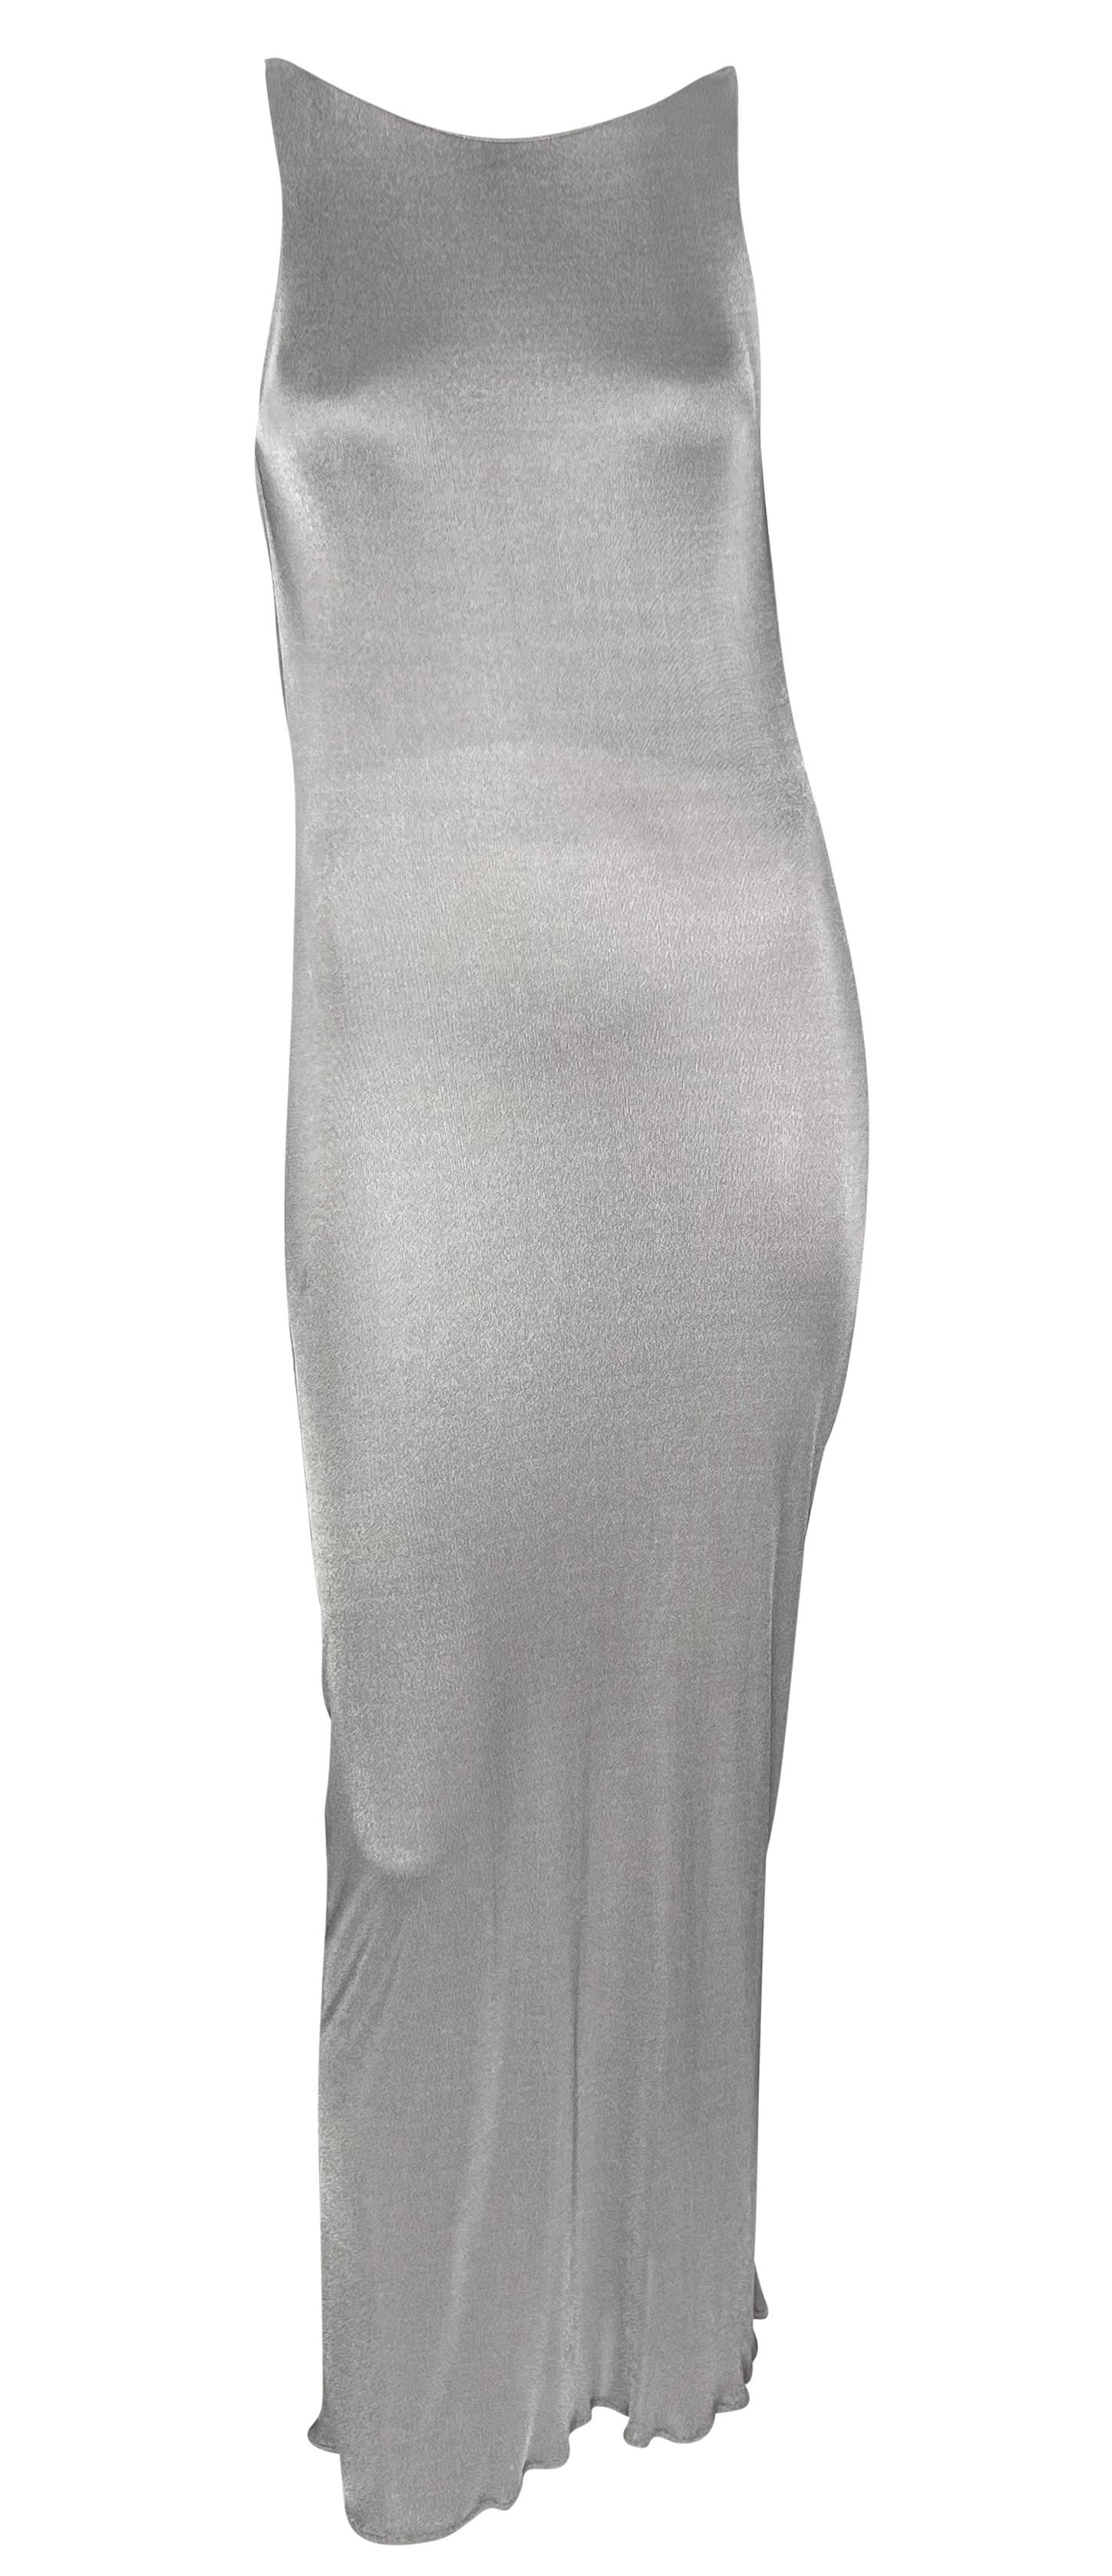 Late 1990s Yigal Azrouël Backless Silver Metallic Slinky Bodycon Gown  For Sale 1